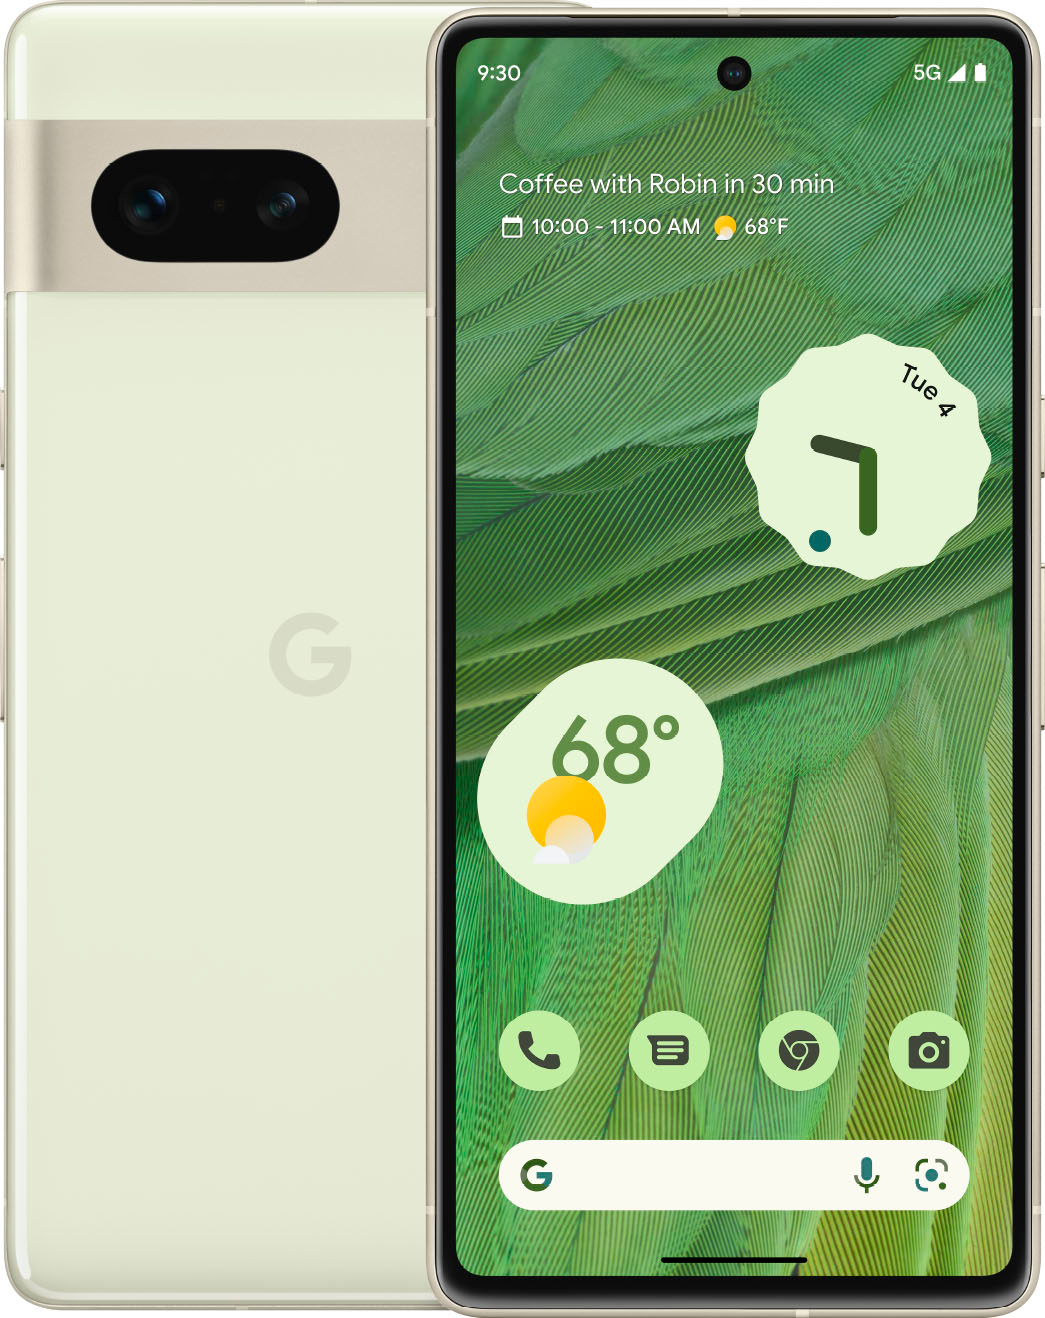 Google Pixel 7 5G Deals - Save on a Pixel 7 5G contract